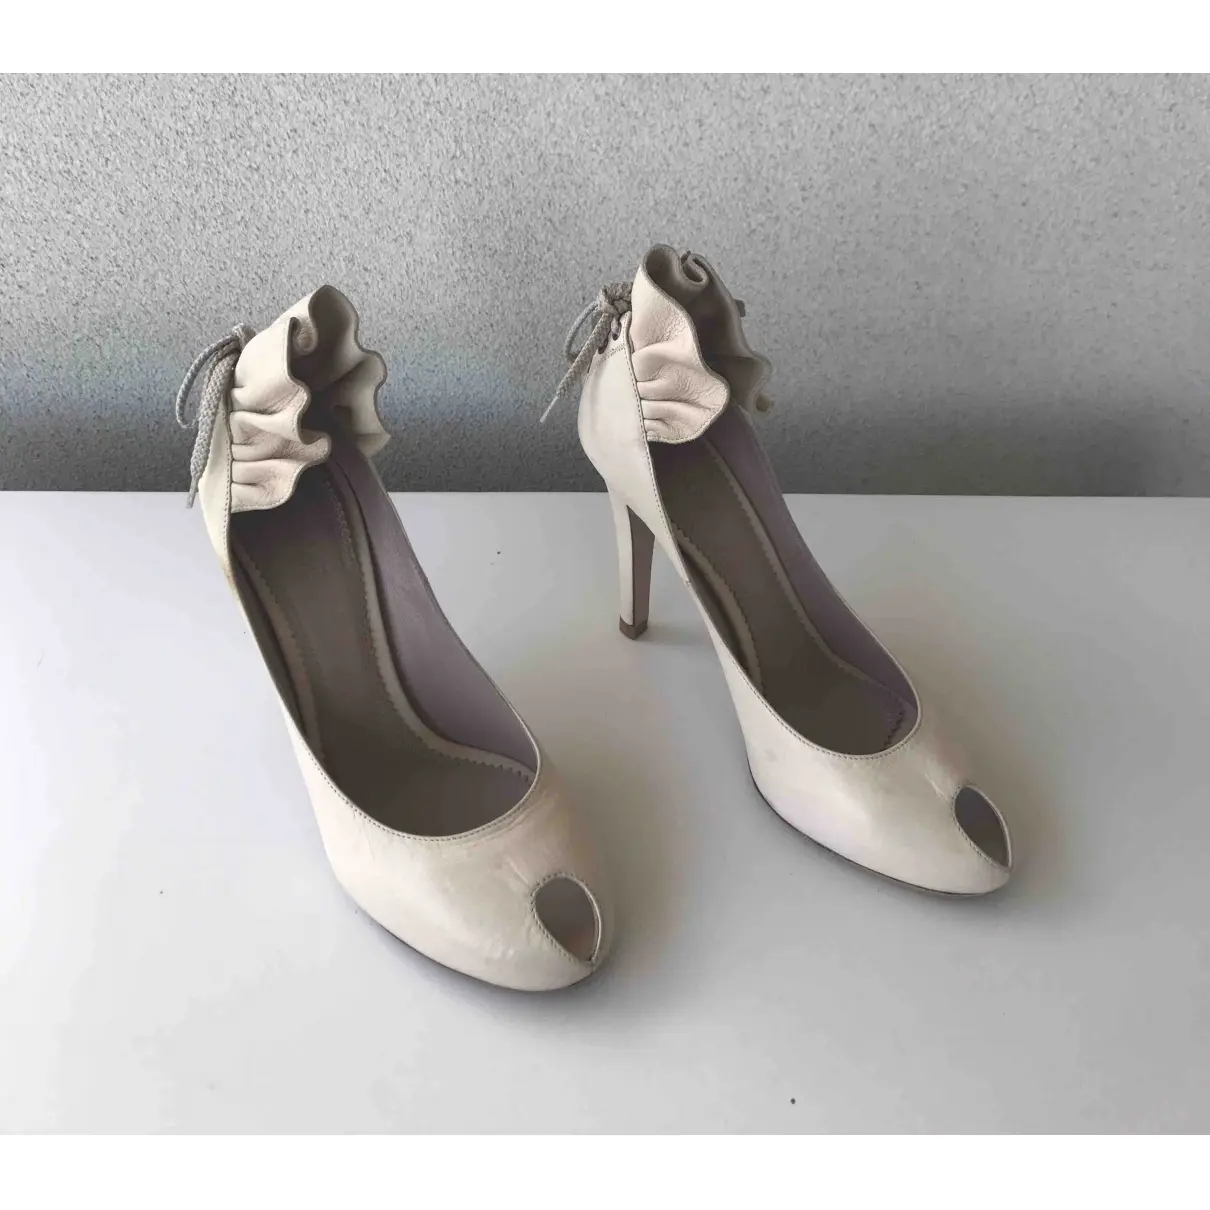 Chloé Leather heels for sale